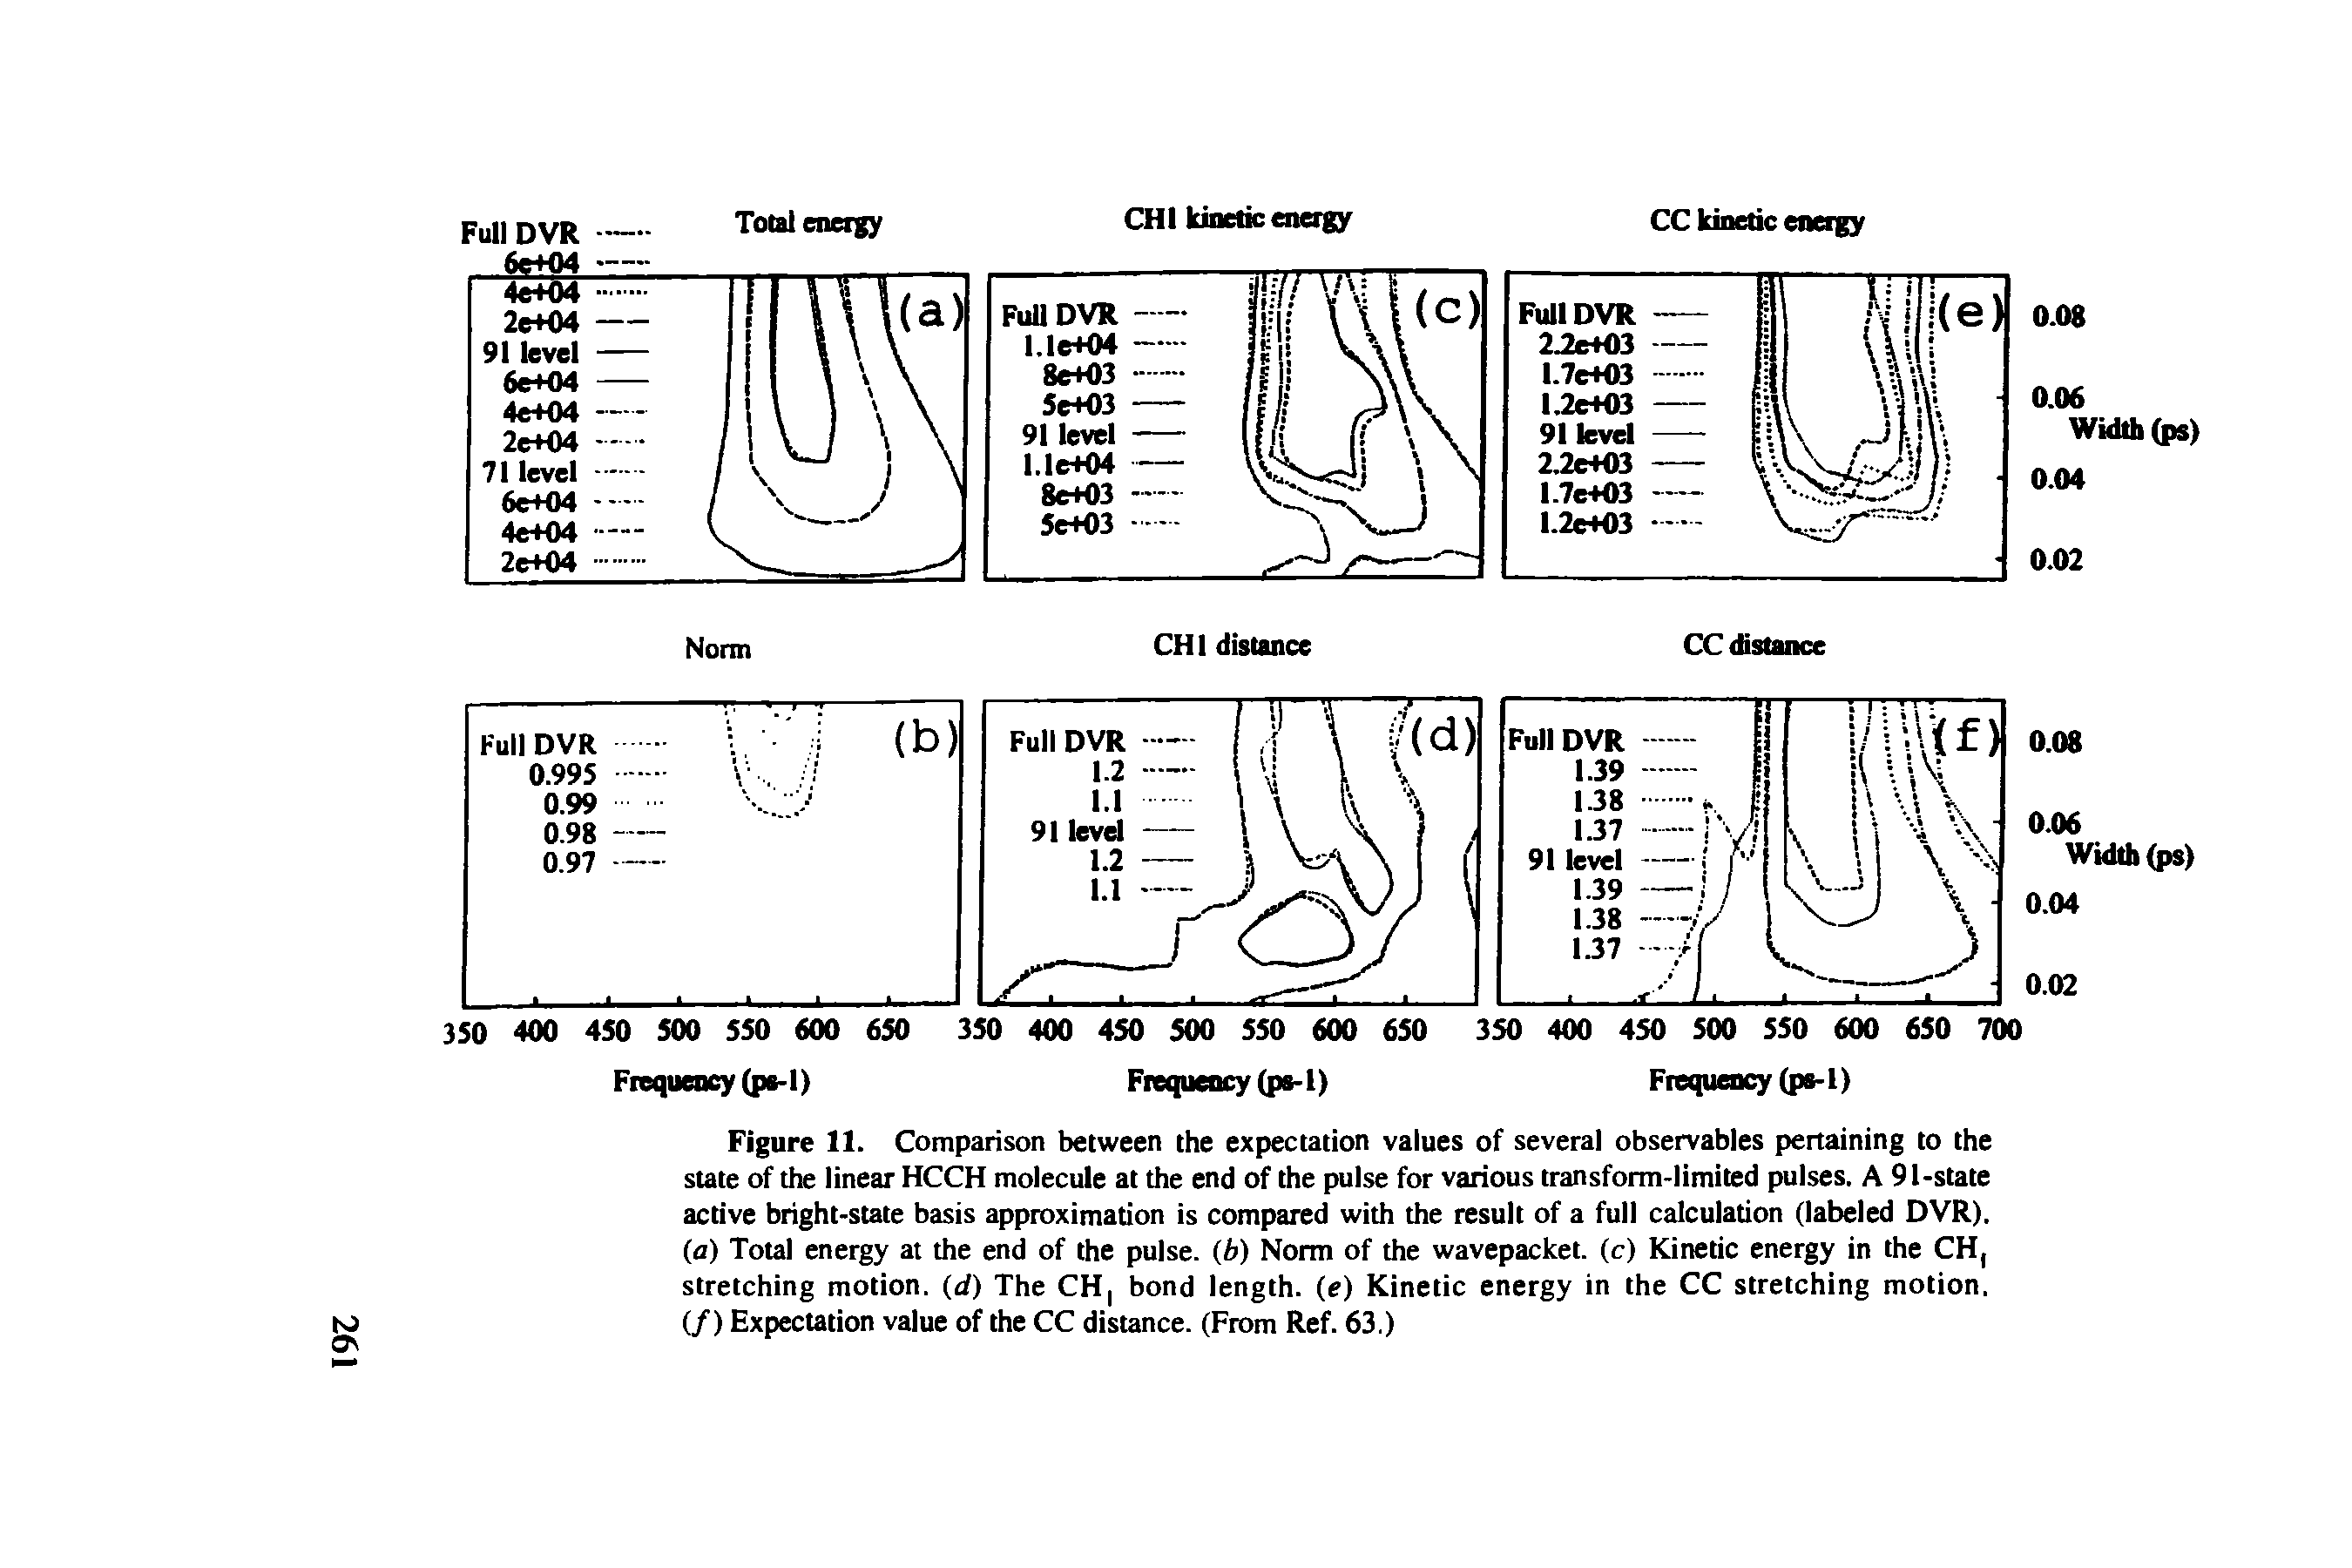 Figure 11. Comparison between the expectation values of several observables pertaining to the state of the linear HCCH molecule at the end of the pulse for various transform-limited pulses. A 91-state active bright-state basis approximation is compared with the result of a full calculation (labeled DVR).